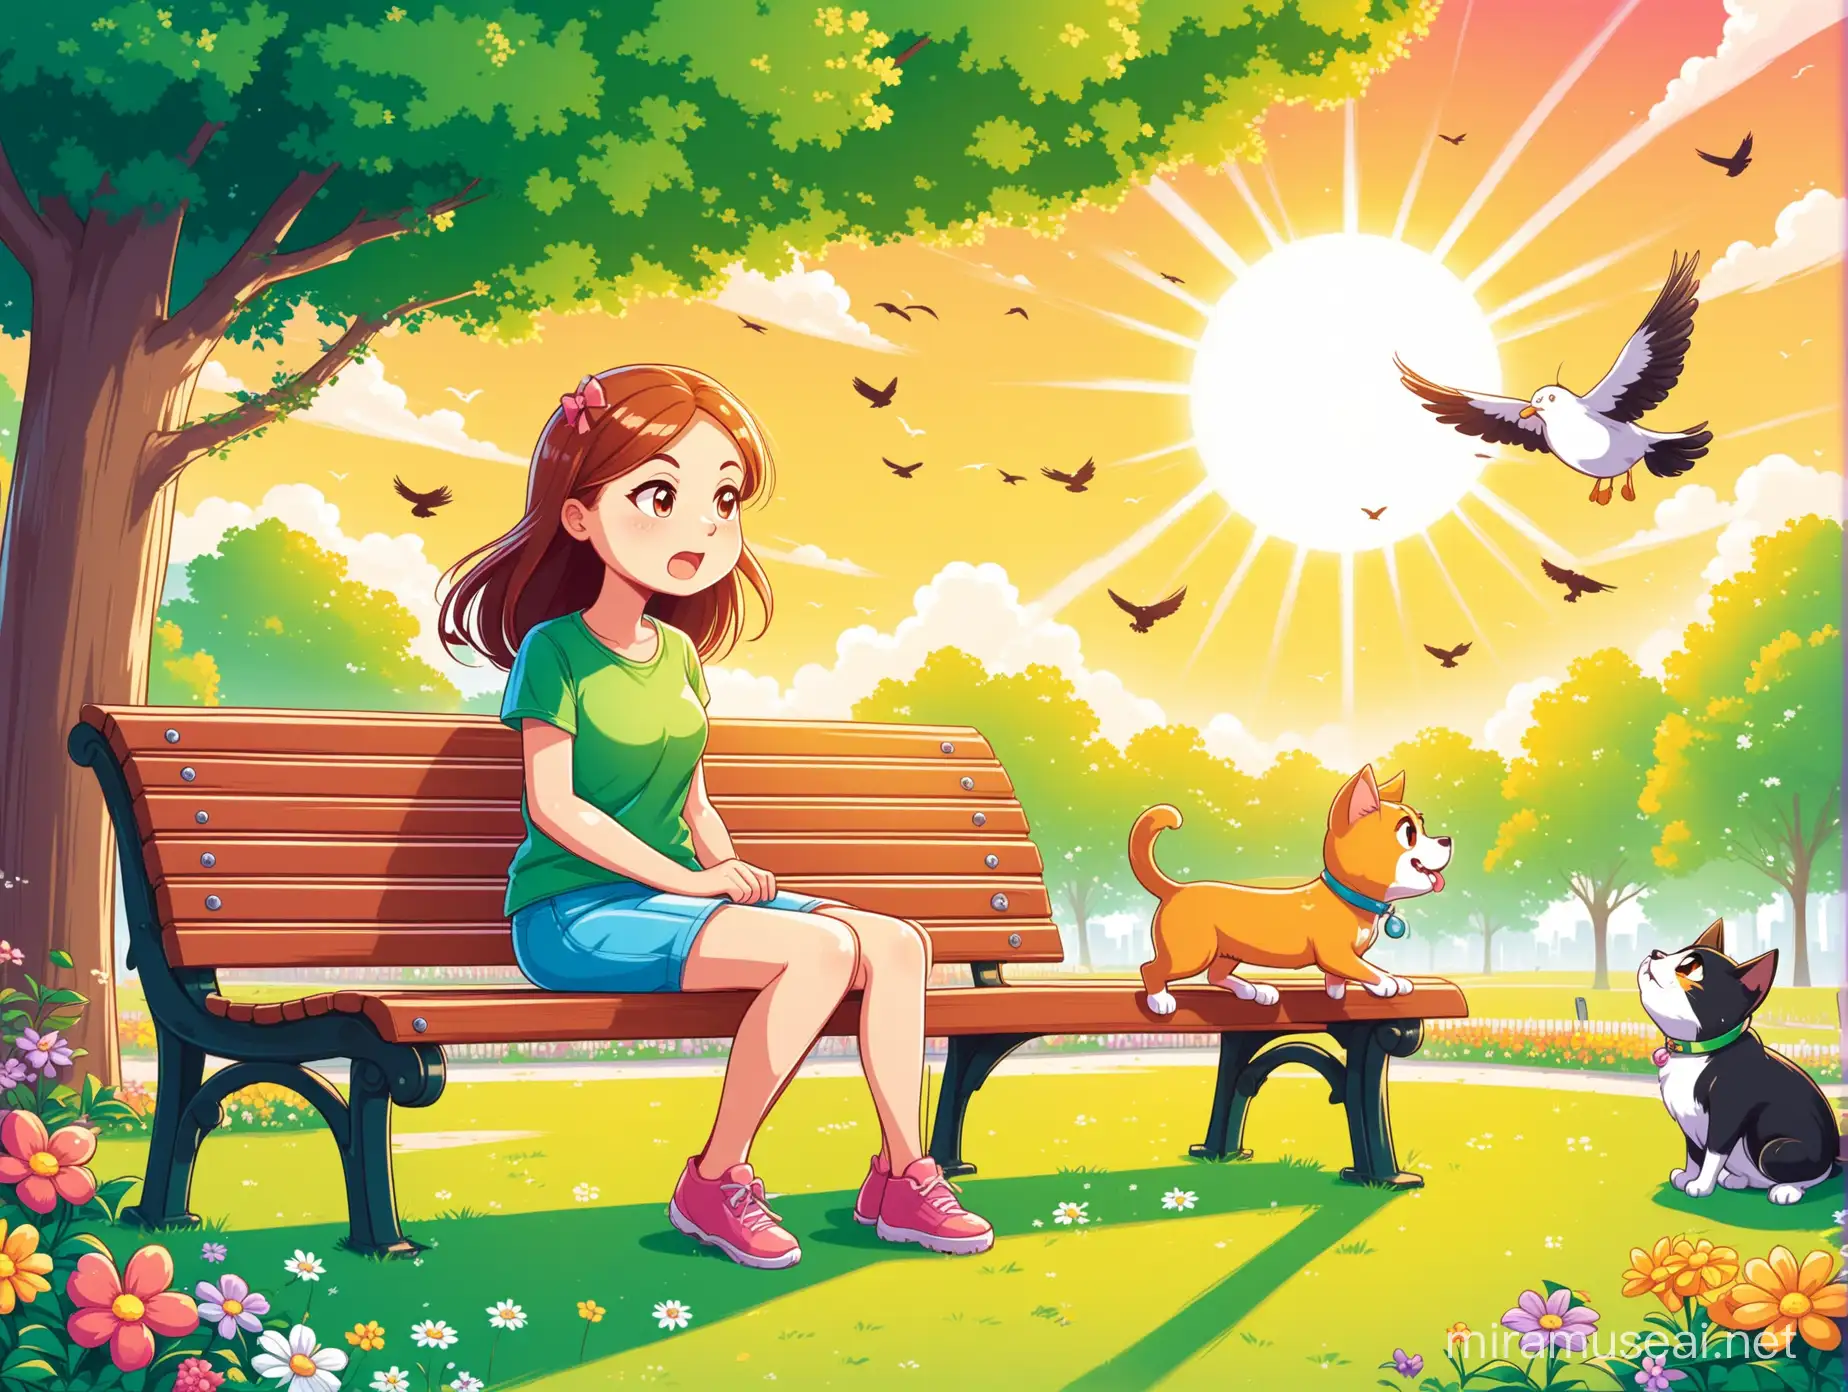 Girl with Dog Watching Cat Fight in Colorful Park Scene